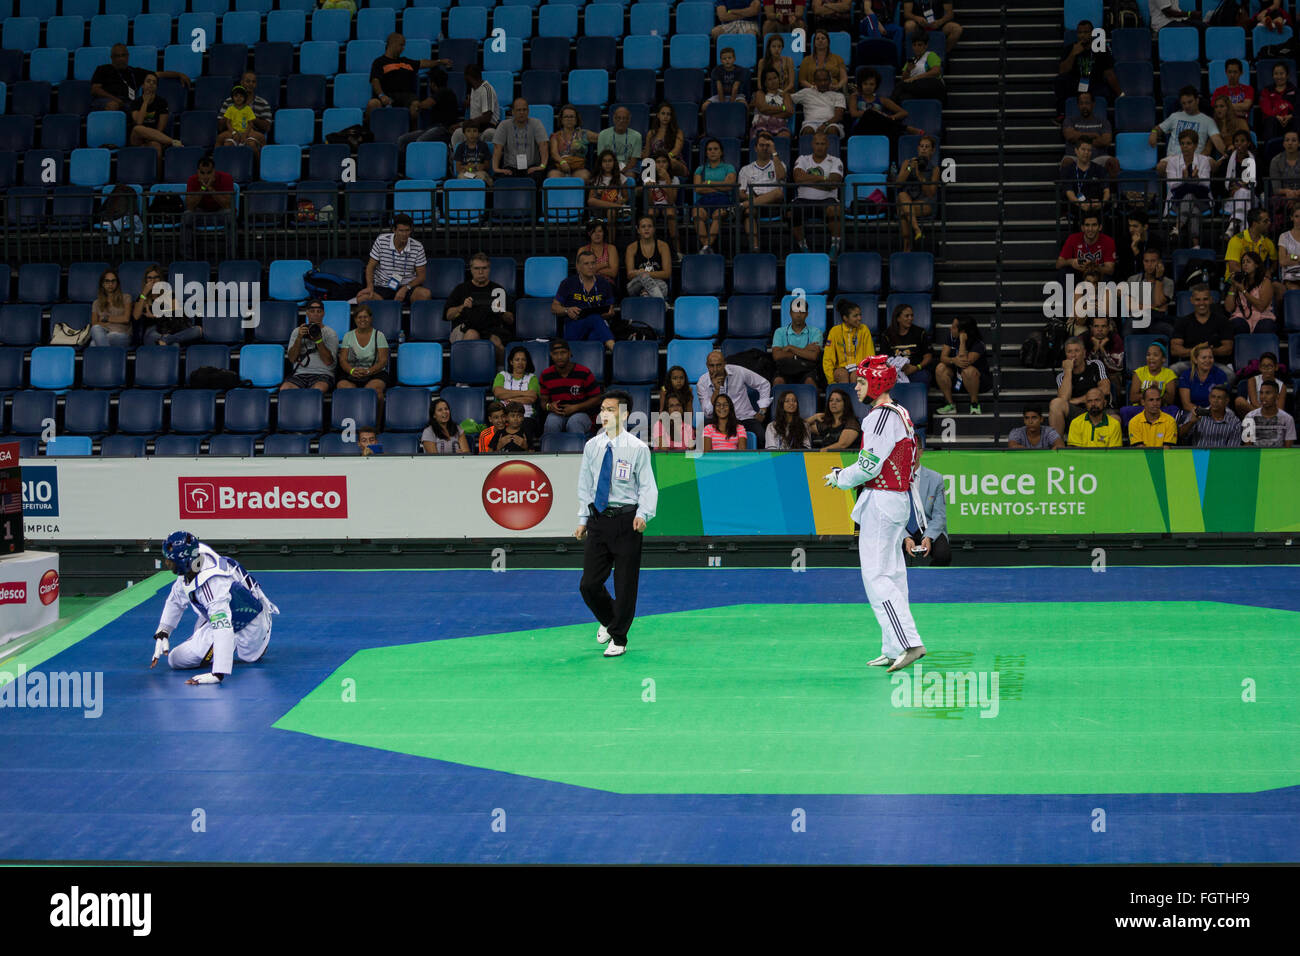 Rio de Janeiro, Brazil, 21 February 2016: Rio 2016 Olympic Park holds a test event for Rio 2016 Olympic Games. The International Taekwondo Tournament meets 64 athletes from 15 countries. Among the athletes participating in the competition are: Iris Tang Sing, Rafaela Ahmad, João Miguel Neto, Leonardo de Moraes and Andre Bilia, from Brazil, Rui Bragança from Portugal anda Mayu Yama from Japan. In this photo are the American Healy J. and the Tunisian Trabelsi Y. during the fight which ended with the American victory. Credit:  Luiz Souza/Alamy Live News Stock Photo